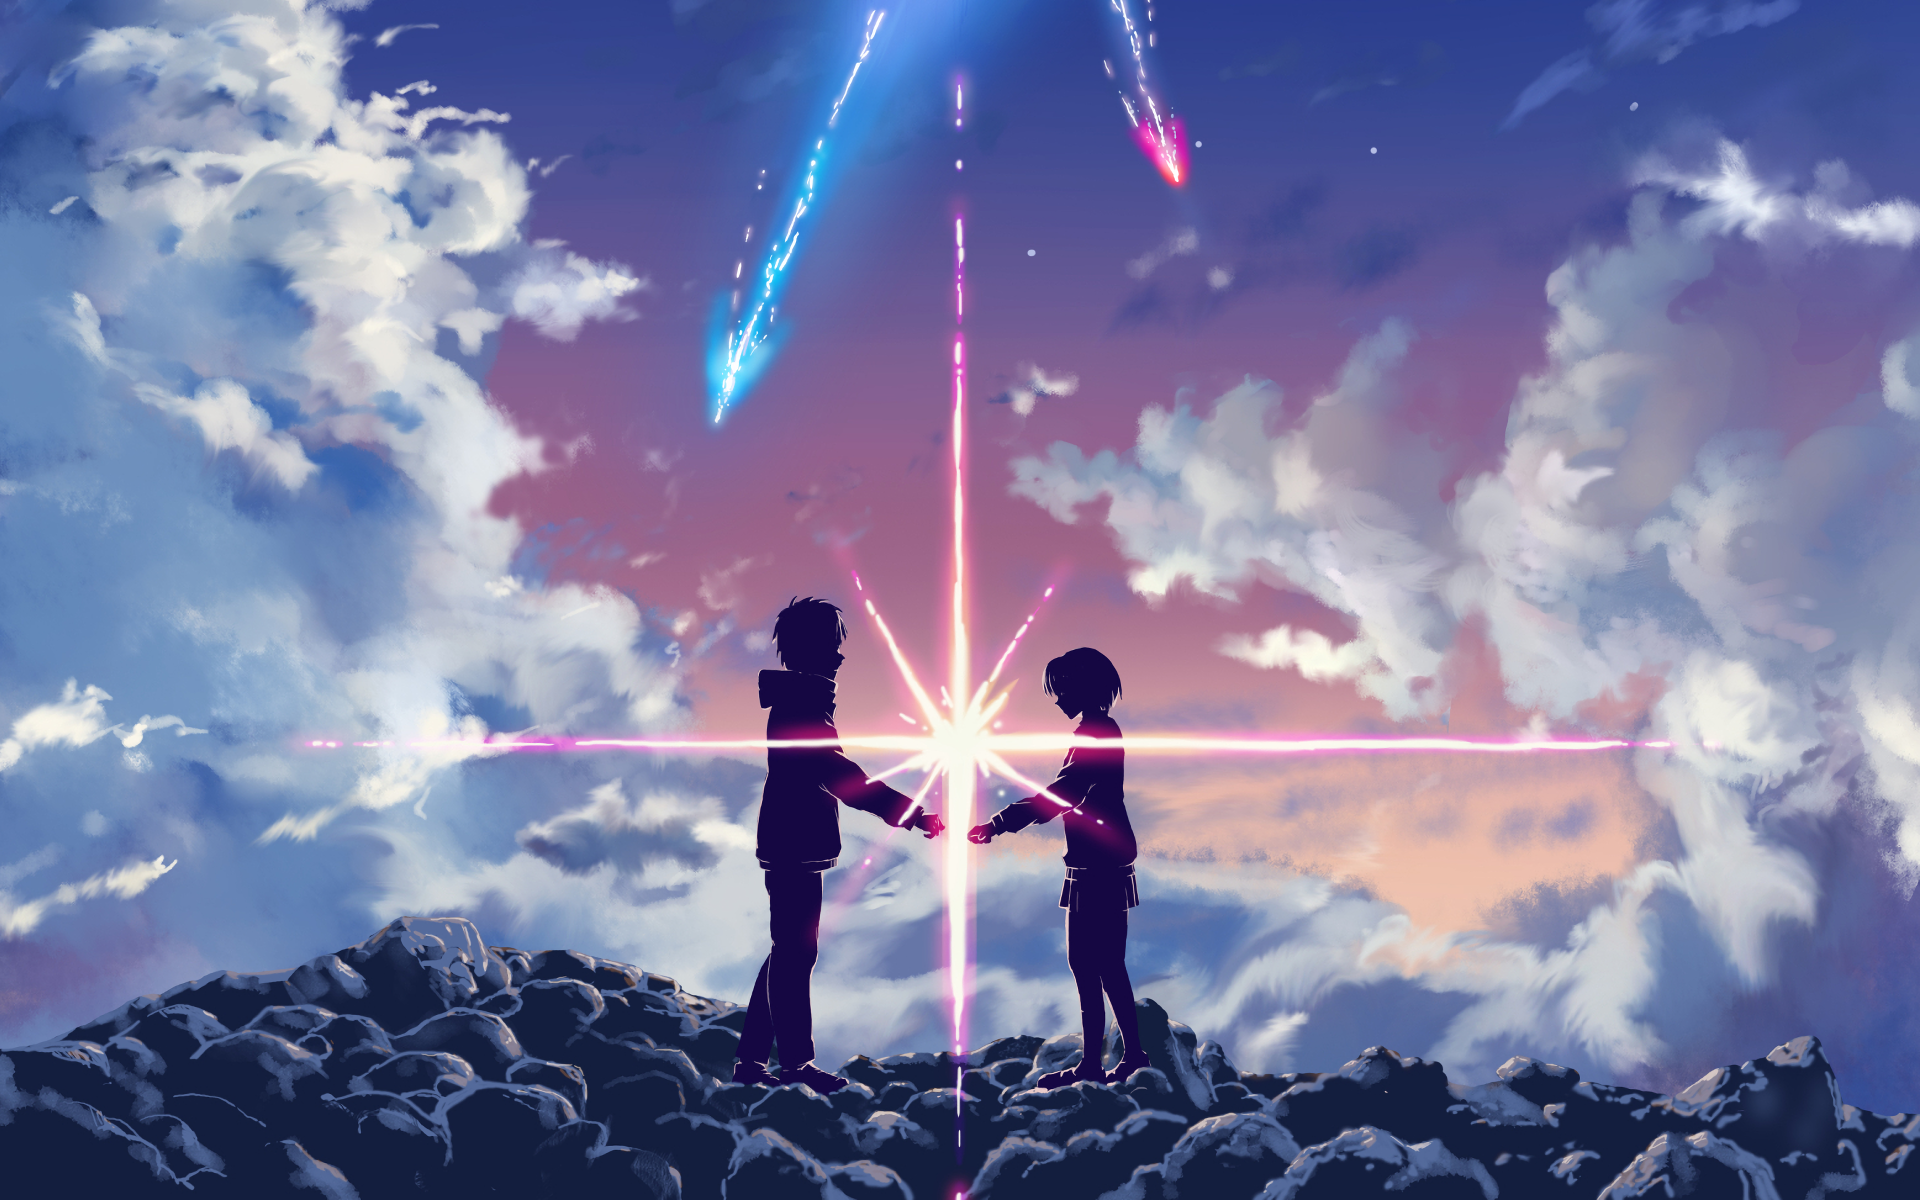 Your Name (2)